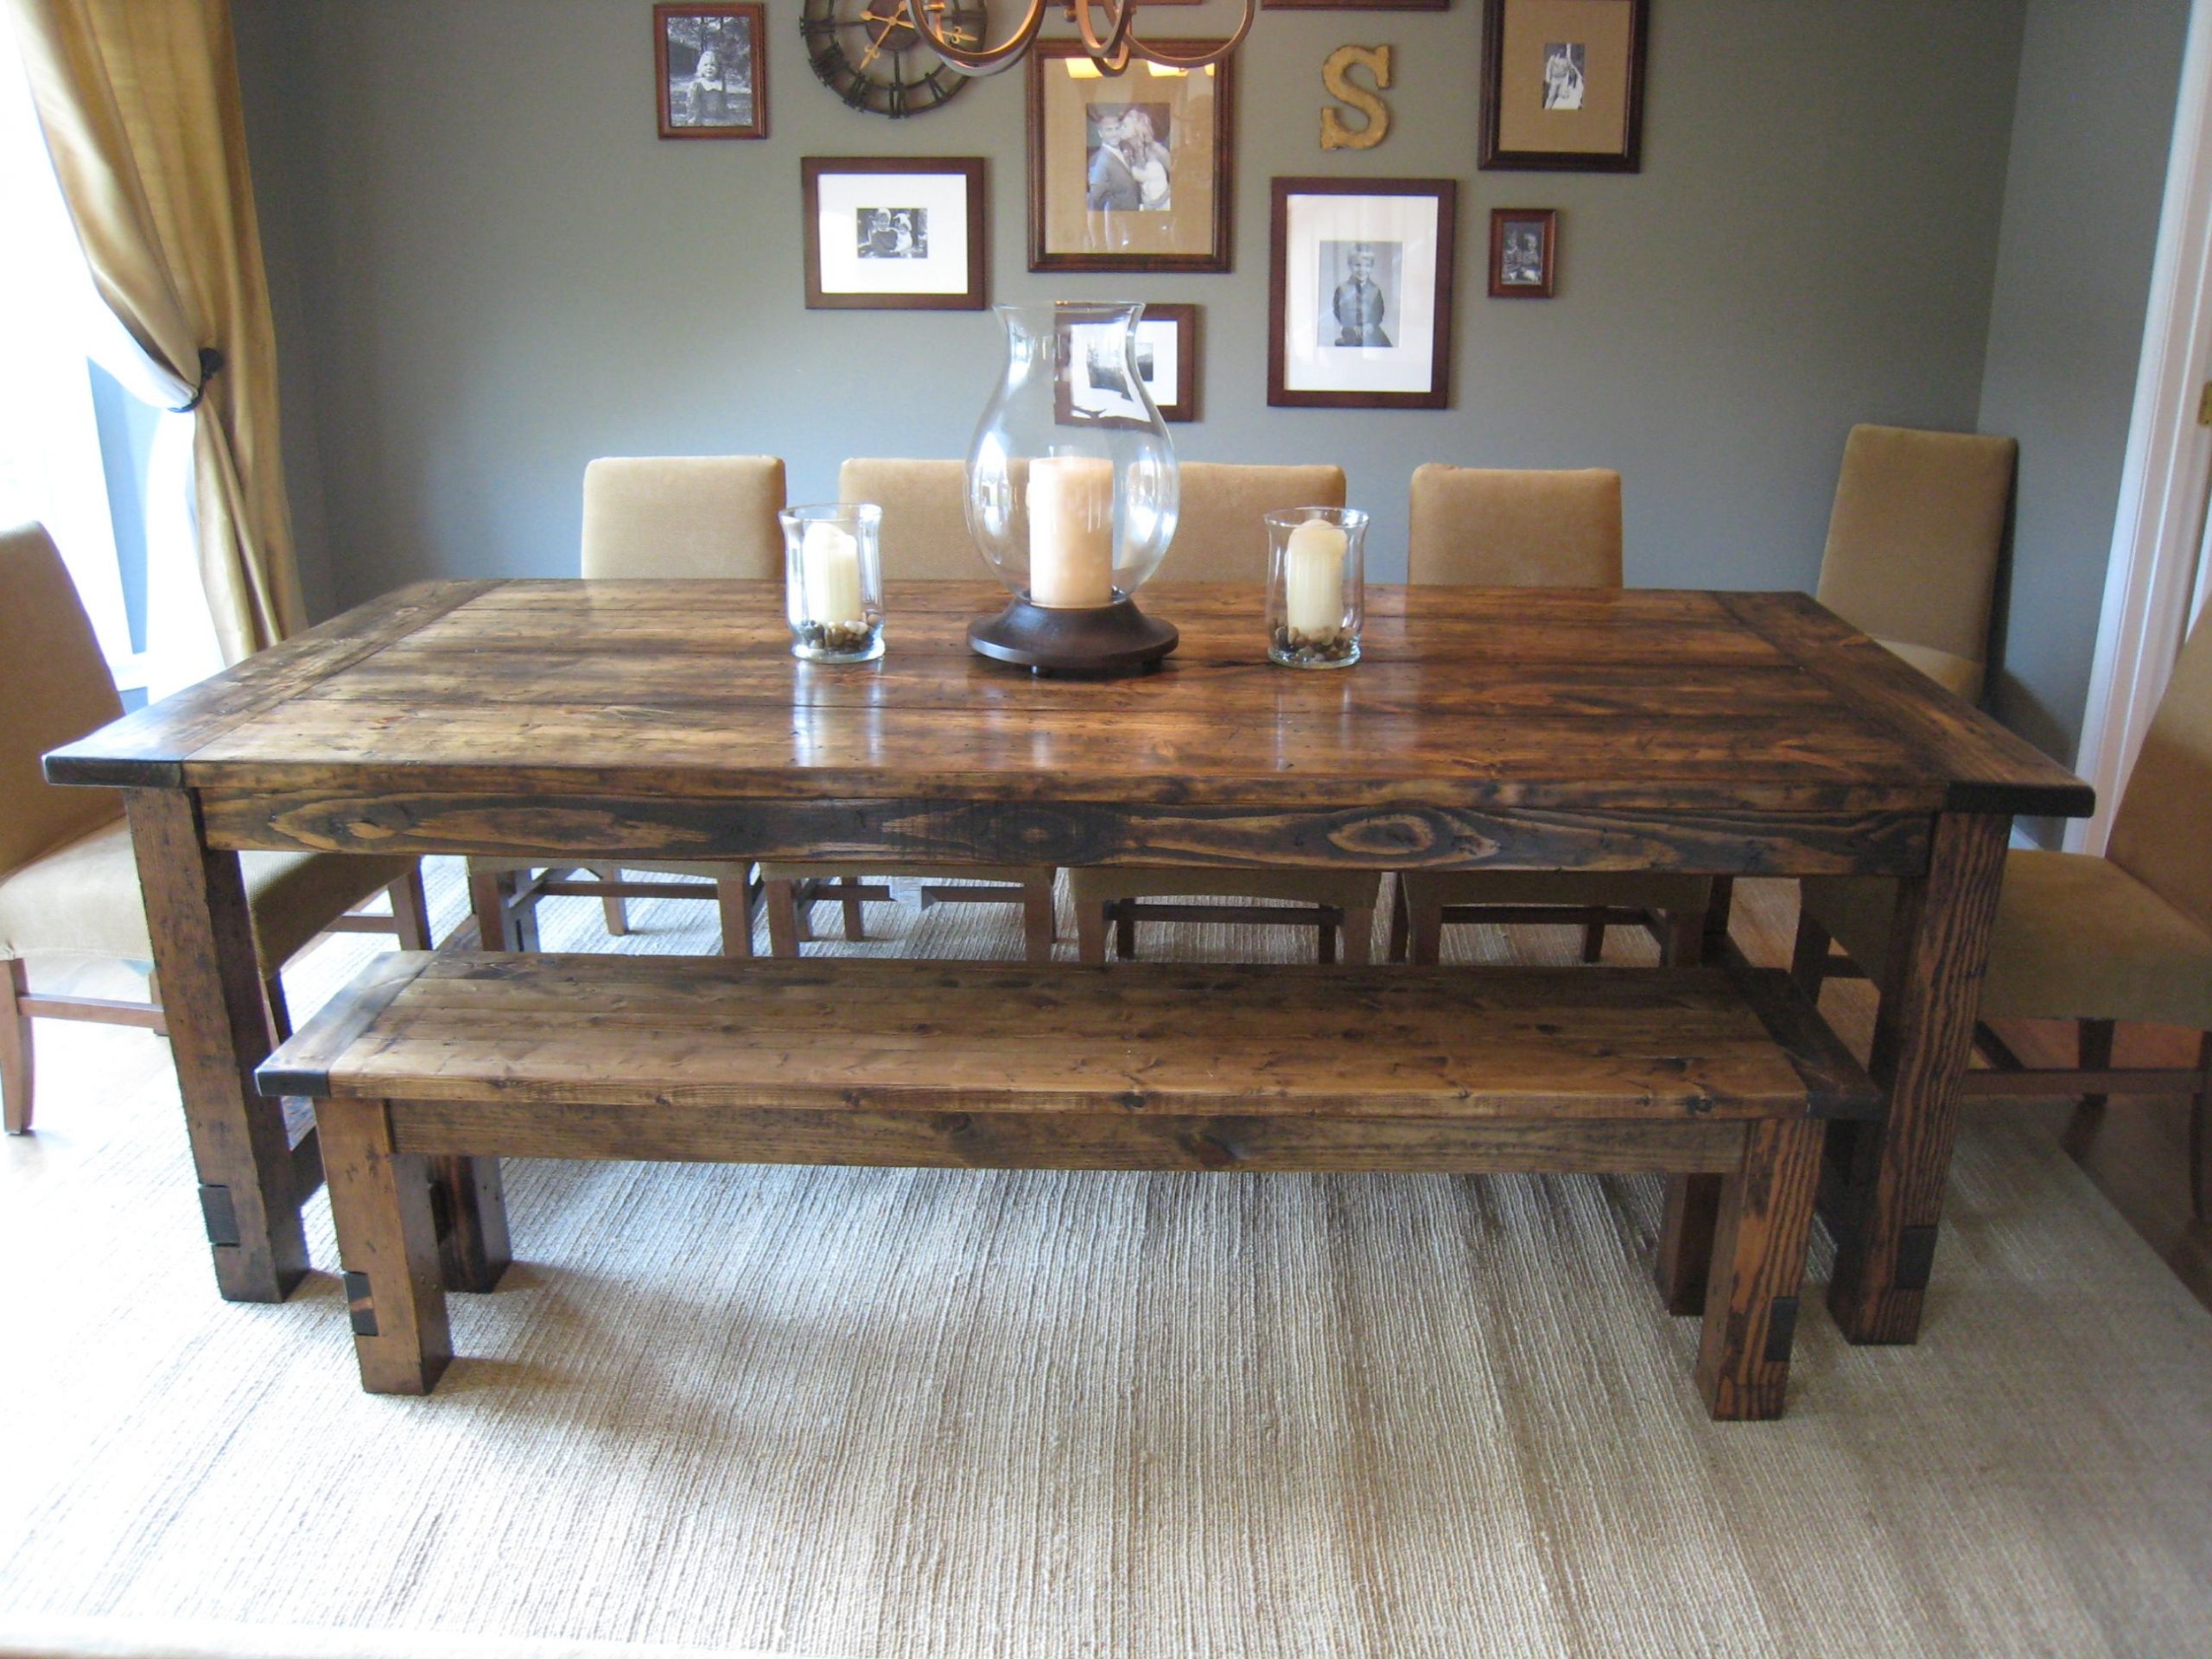 Restoration Hardware Farmhouse Table Replica They Made It for size 2592 X 1944